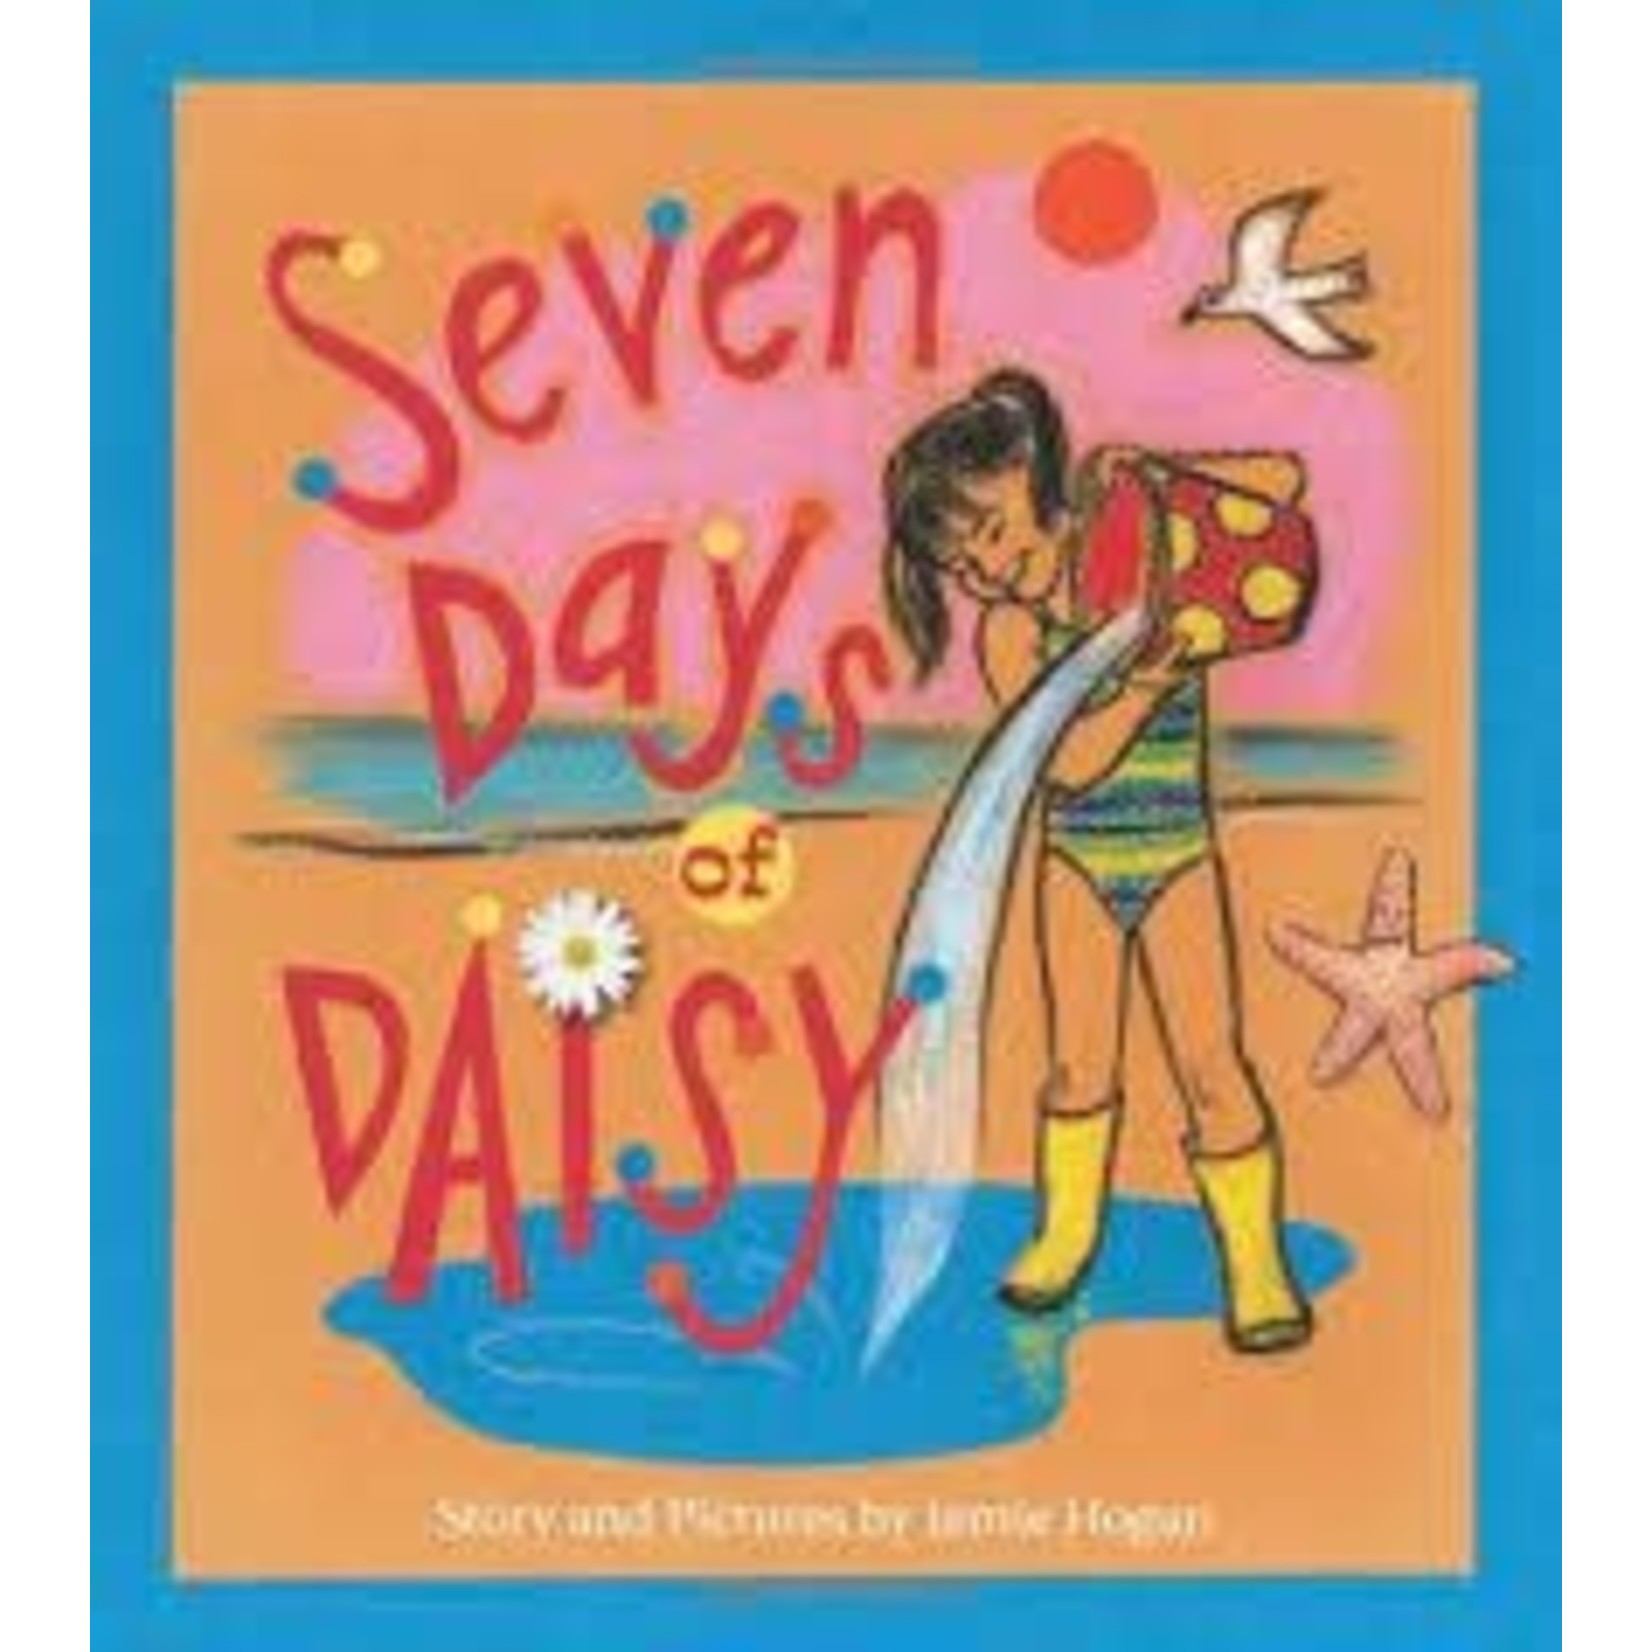 Down East Books Seven Days of Daisy